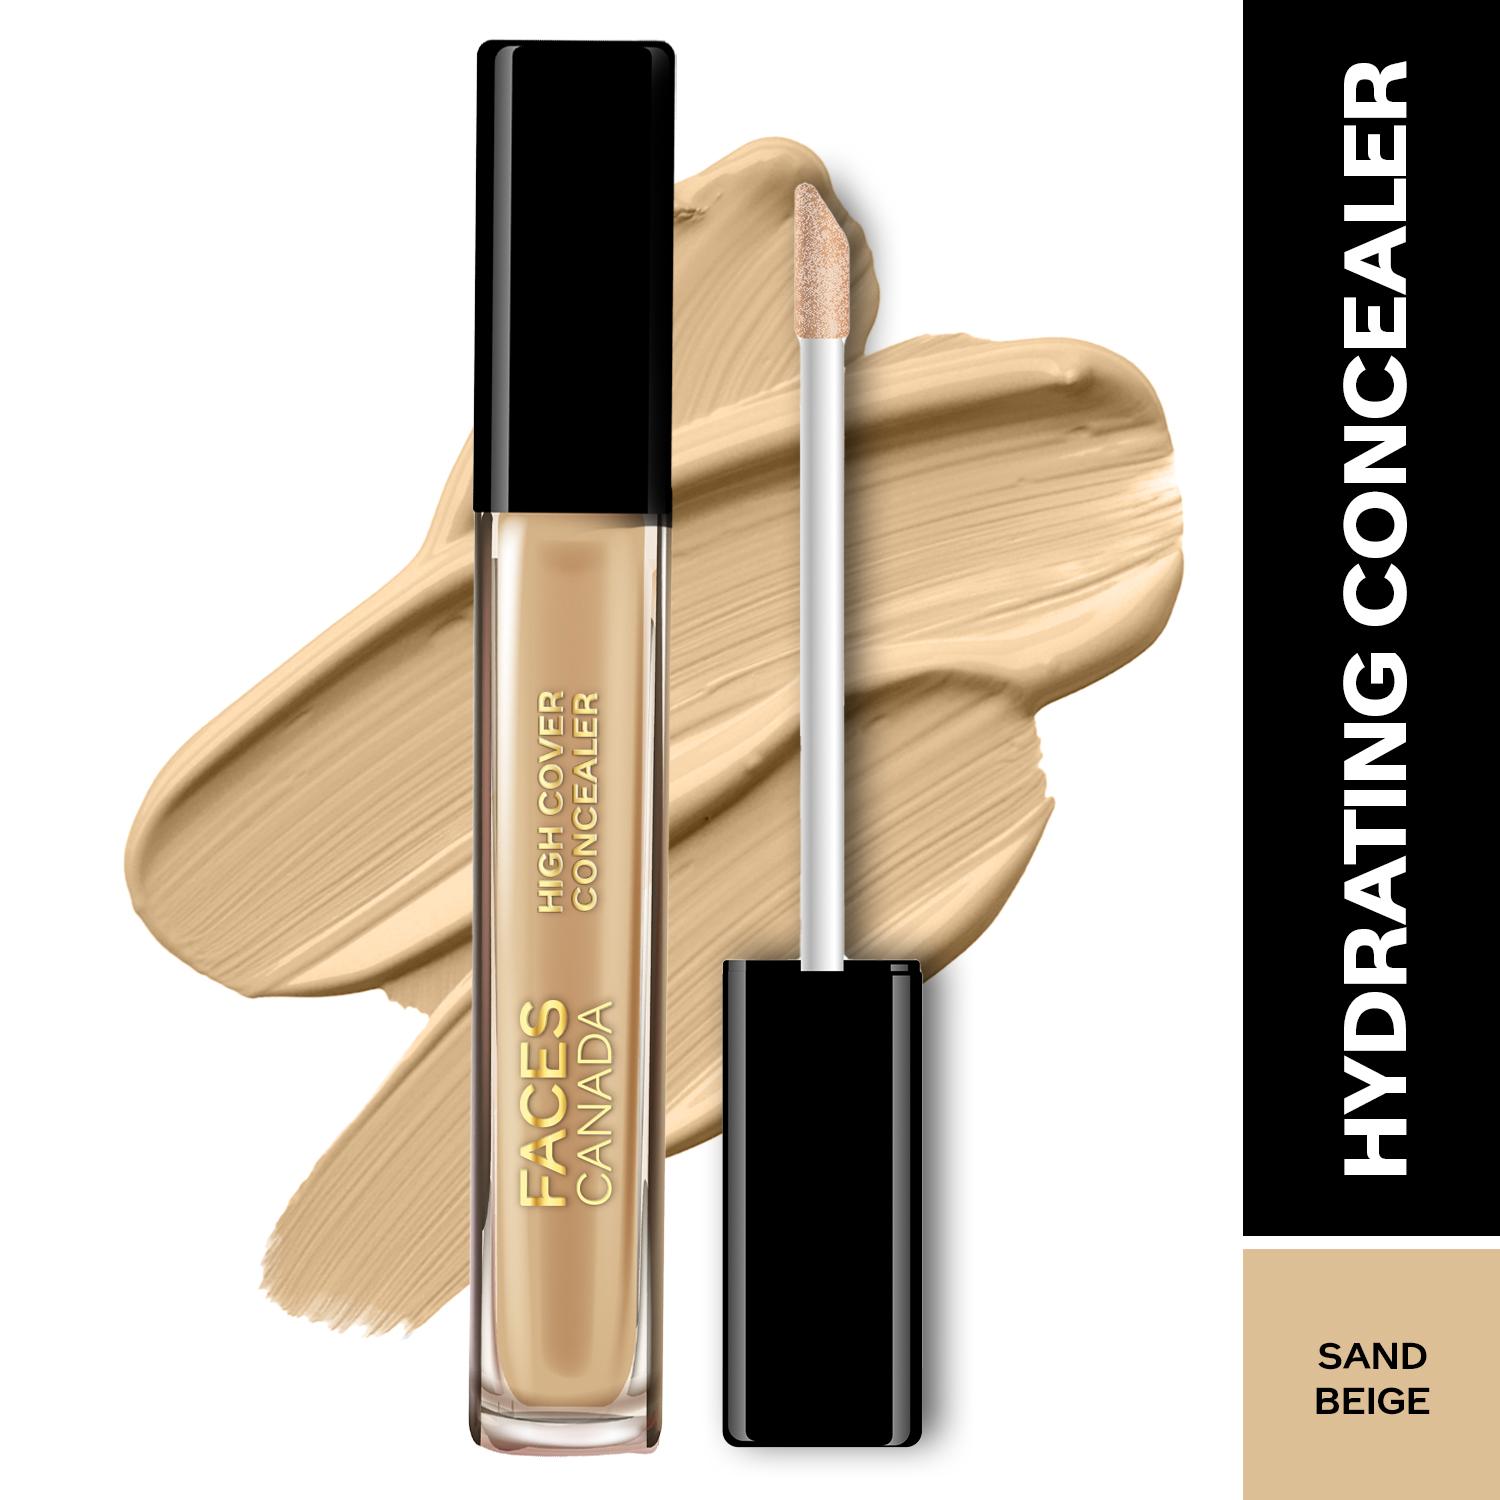 Faces Canada | Faces Canada High Cover Concealer - Sand Beige 01, Blends Easily, Natural Finish (4 ml)